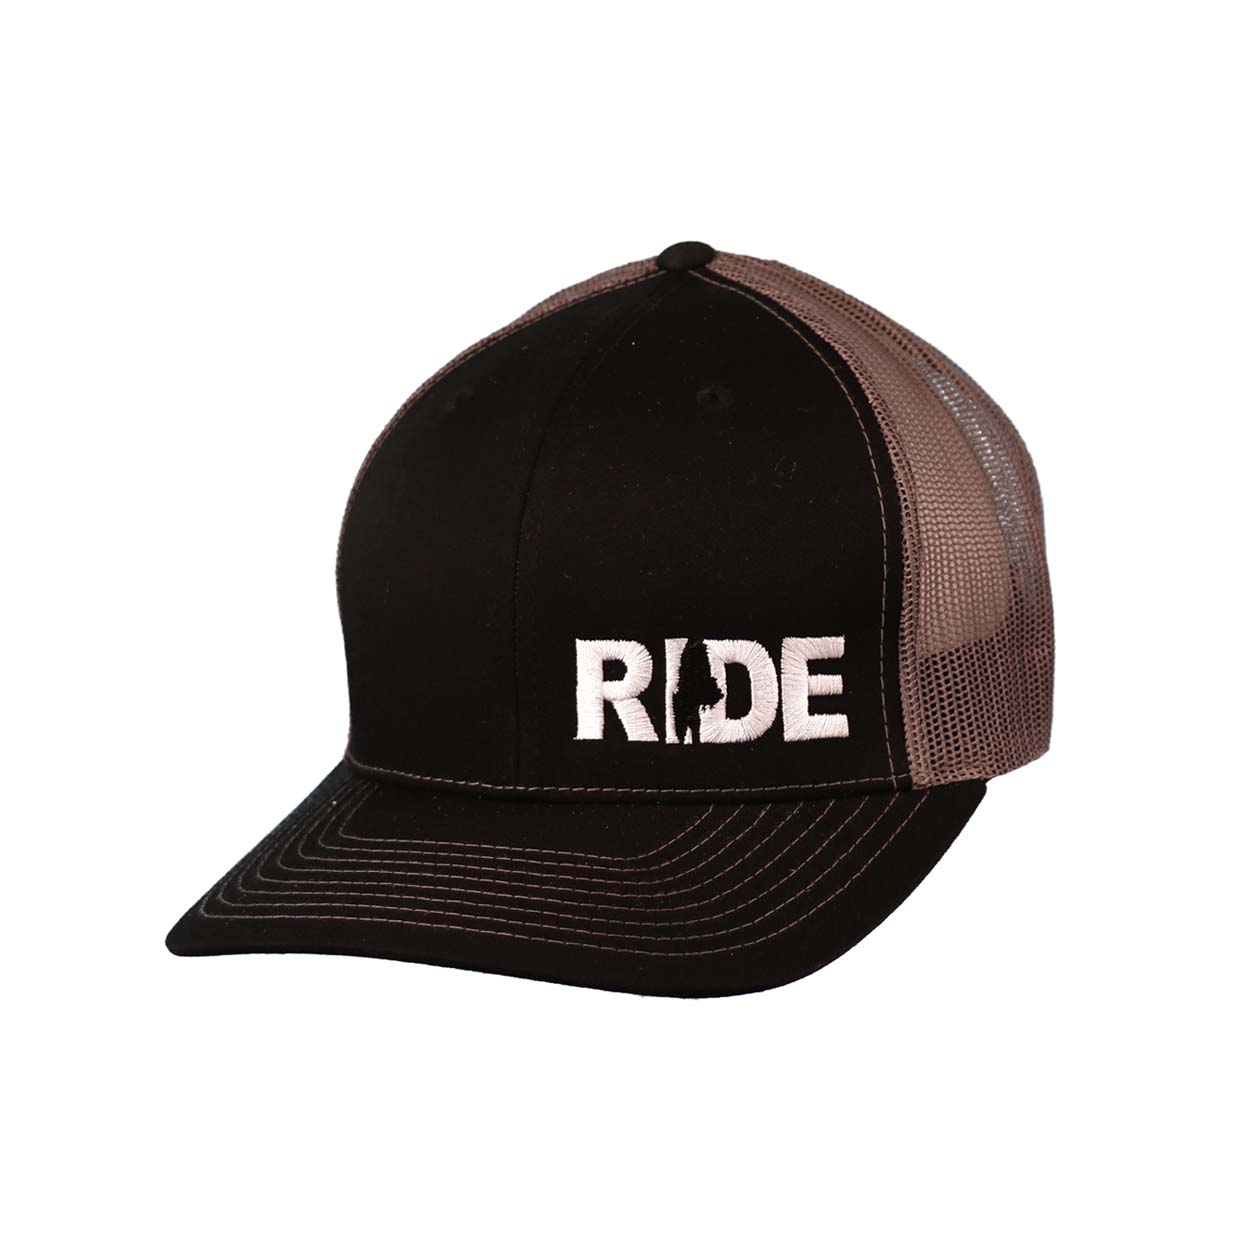 Ride Maine Night Out Pro Embroidered Snapback Trucker Hat Black/Gray